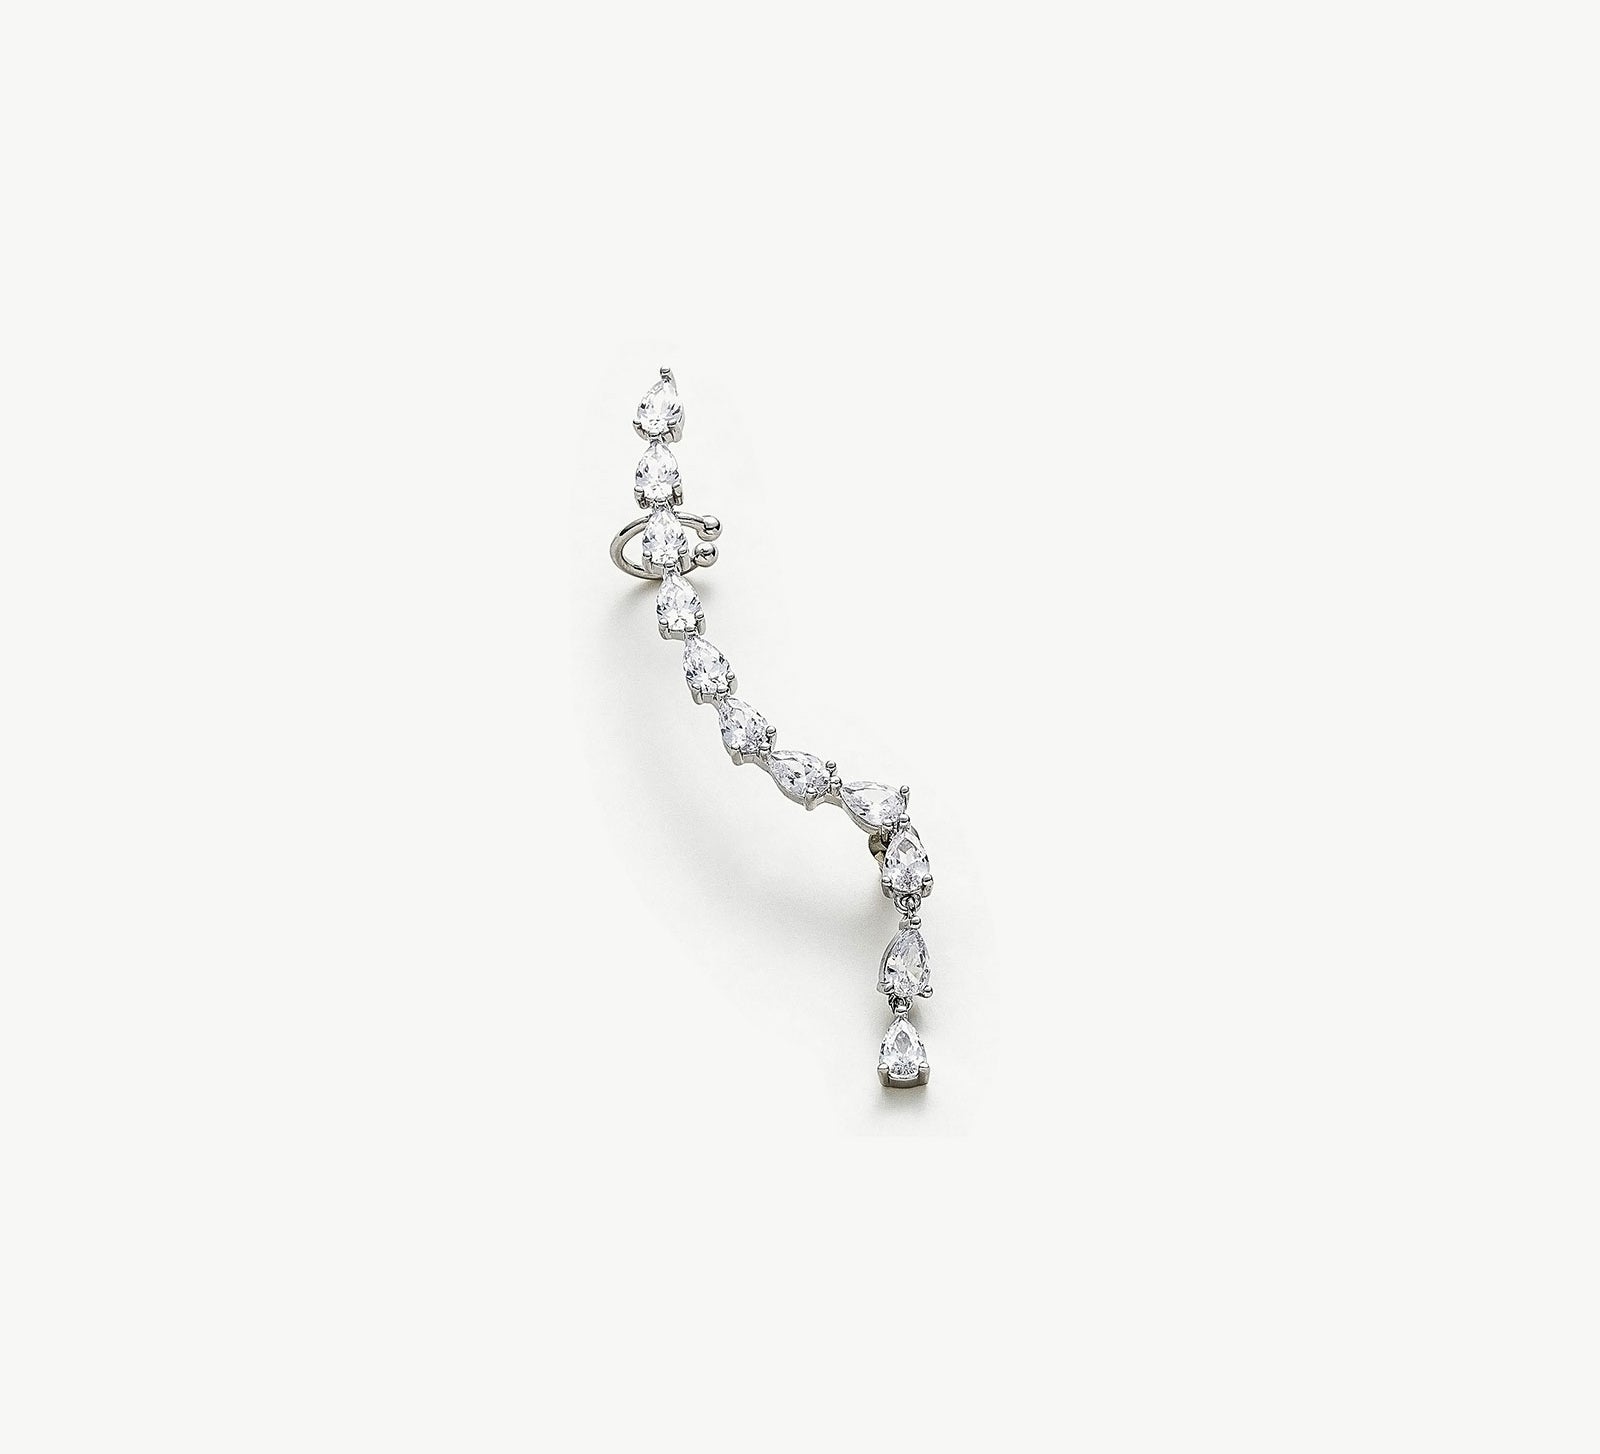 Water Drop Ear Climbers, delicately cascading like dainty droplets, these climbers offer a graceful and subtle accessory for an effortlessly elegant look